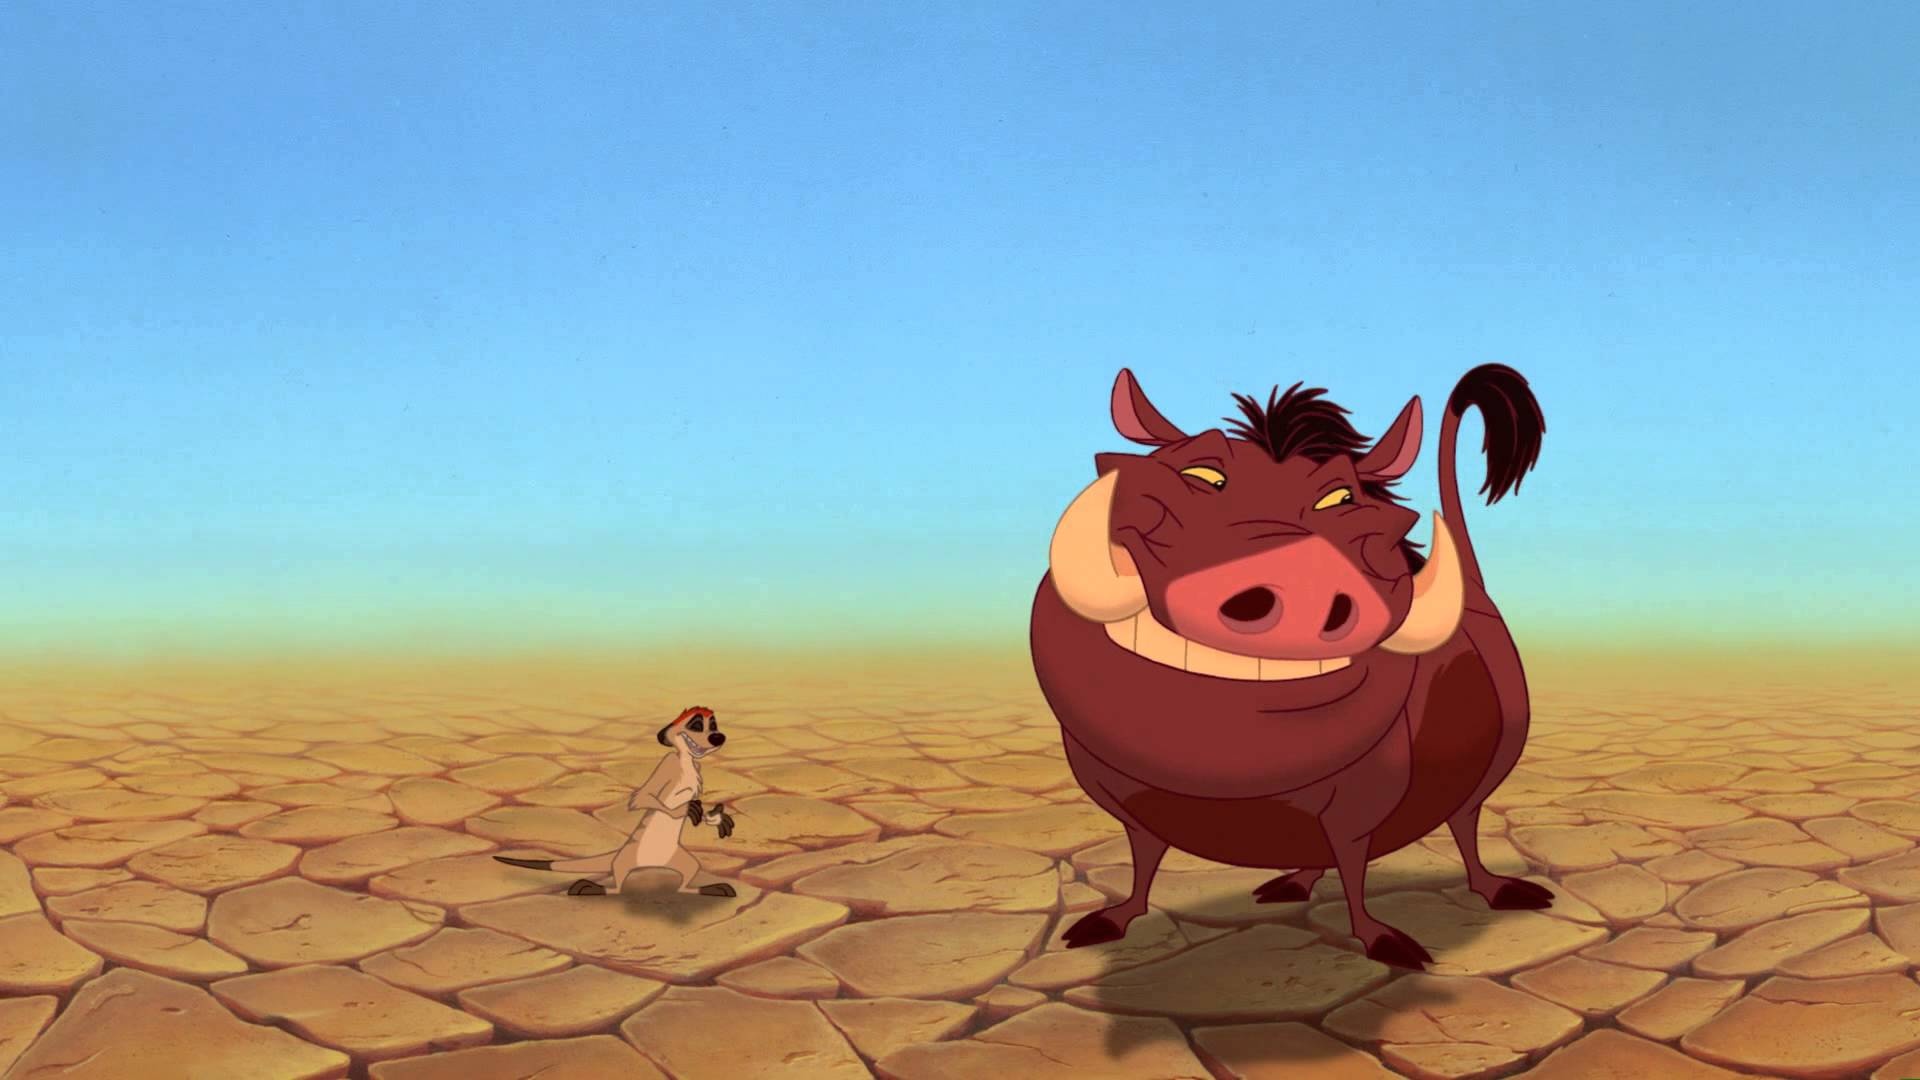 Timon and Pumbaa TV Series, Mickey Mouse pictures, 1920x1080 Full HD Desktop